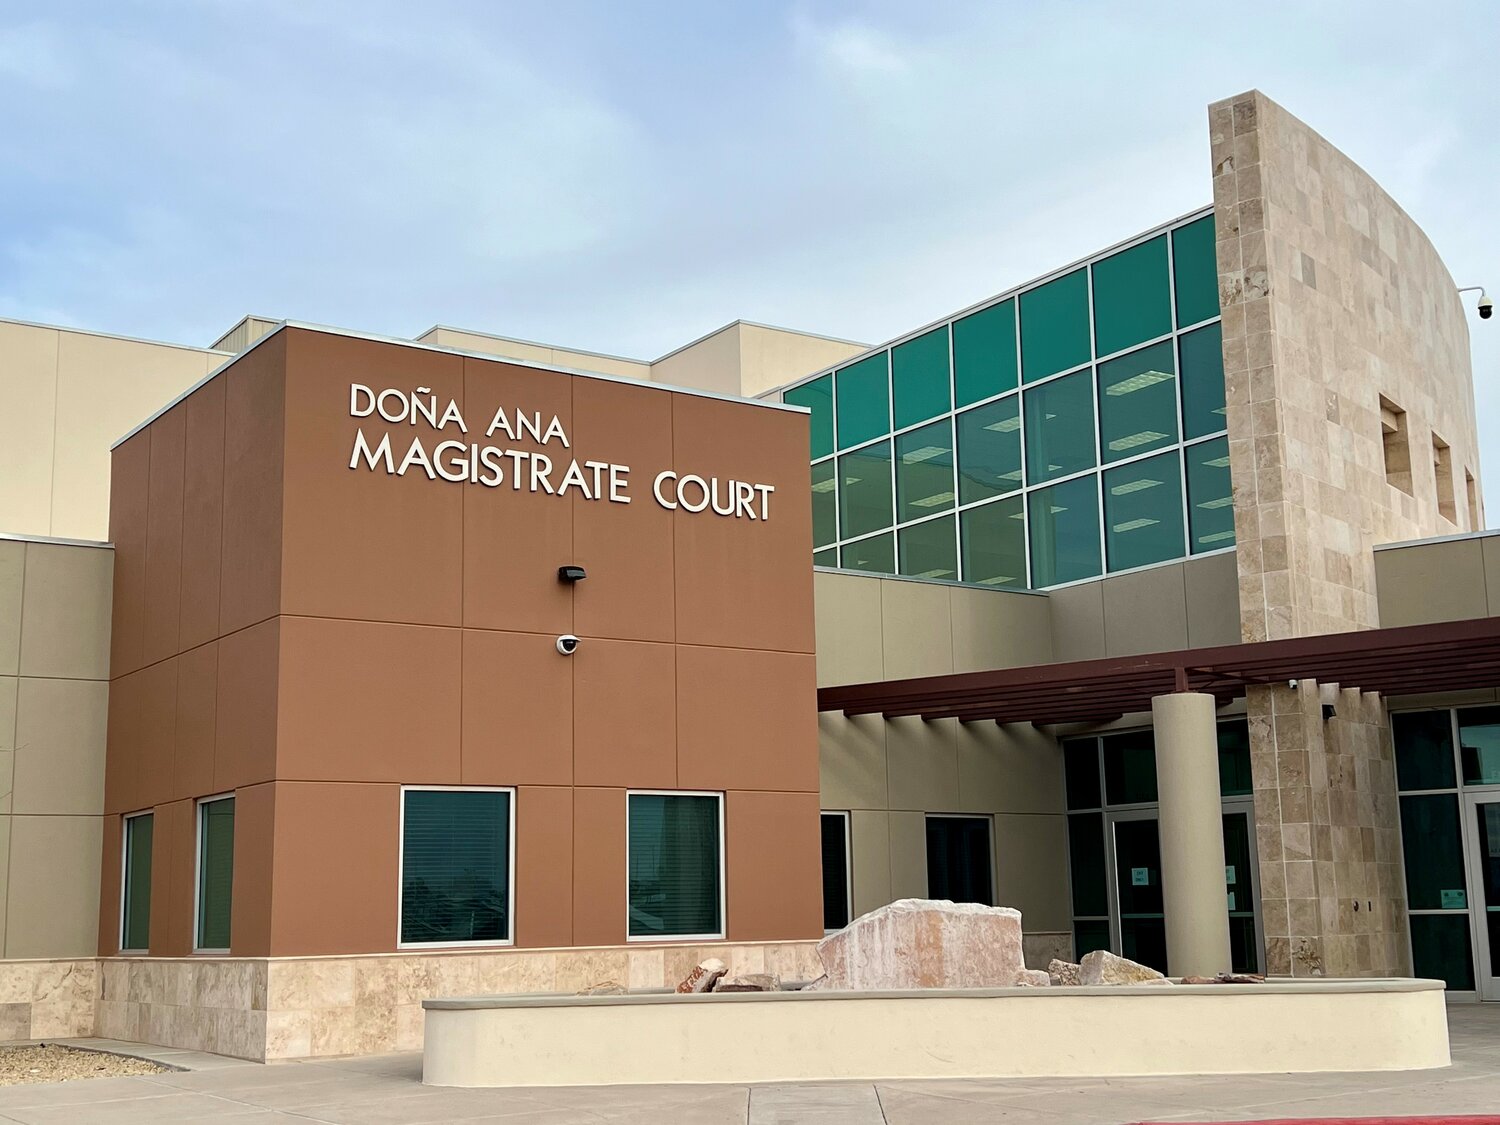 Mondragón appointed Doña Ana magistrate judge Las Cruces Bulletin